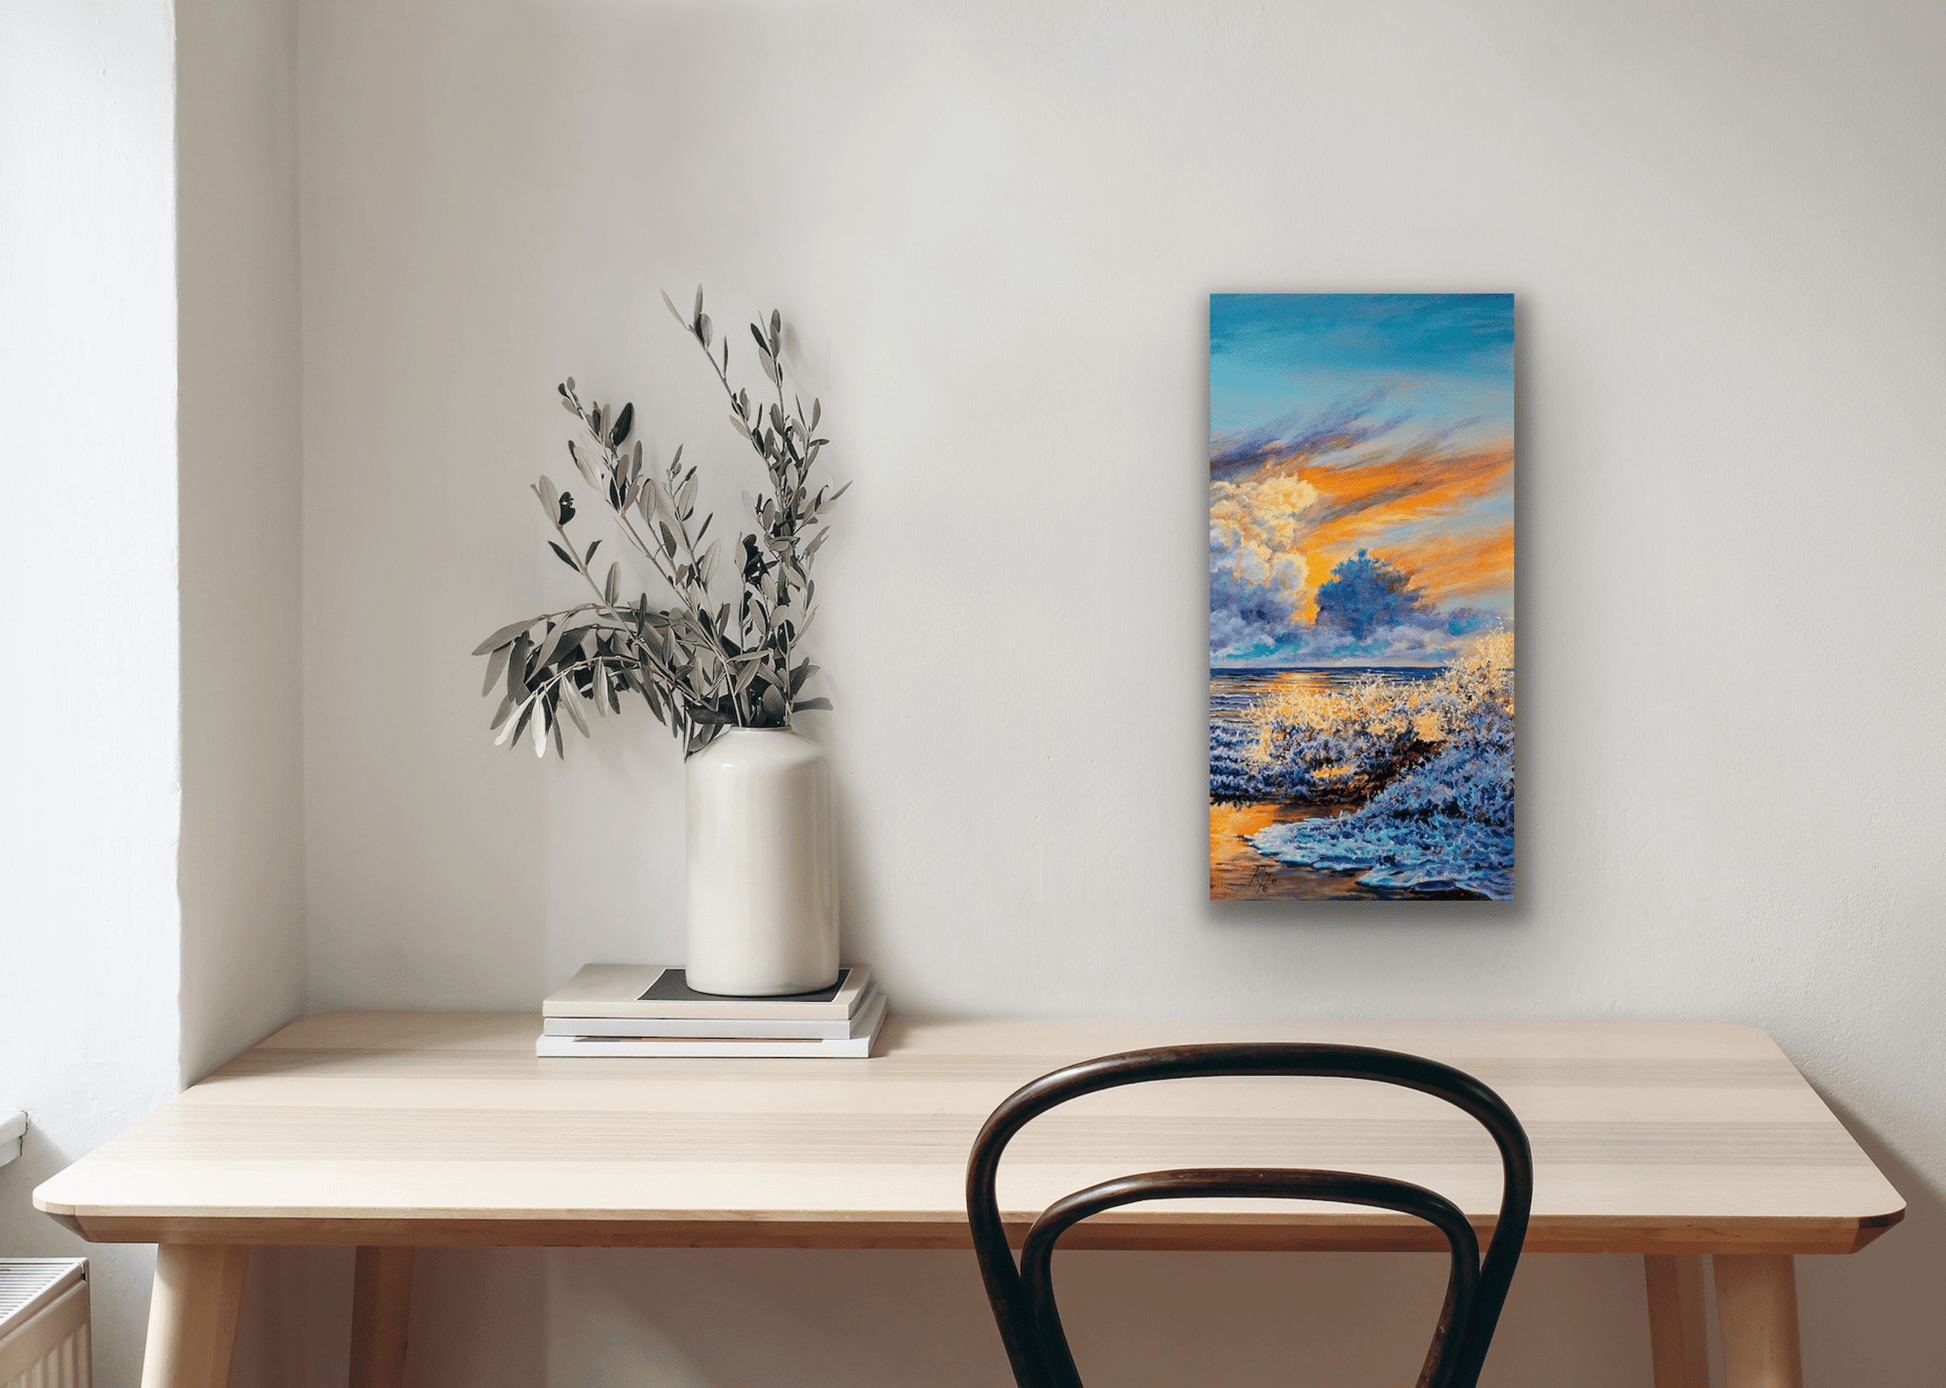 This original painting is of waves crashing on a beach and used stunning soft blues and oranges in the color palette.